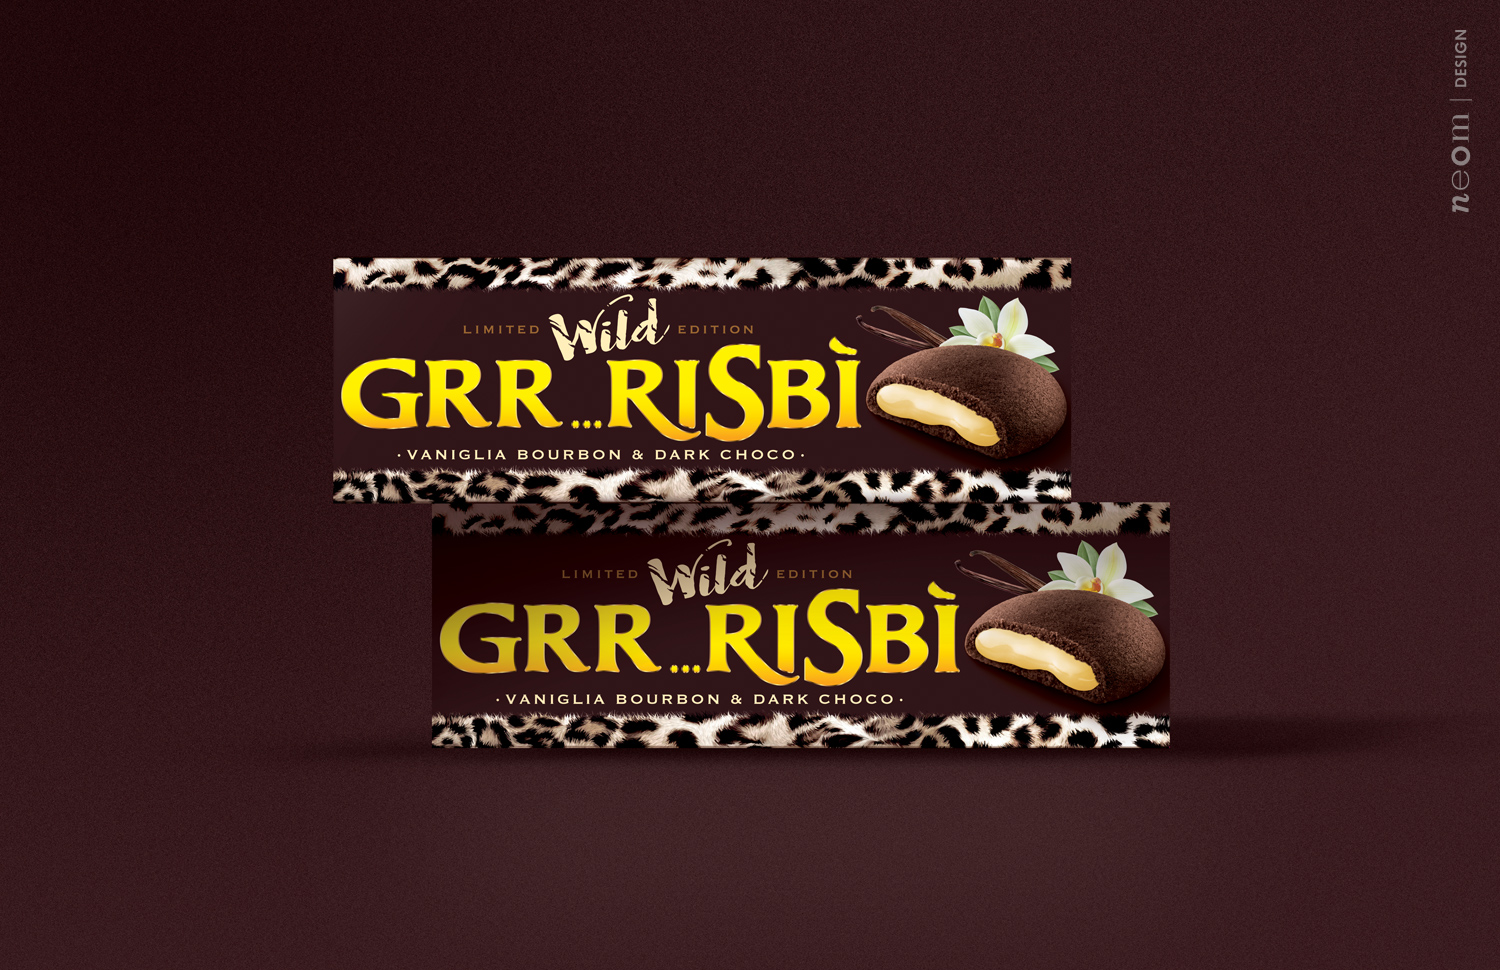 Grisbì Wild Special Edition